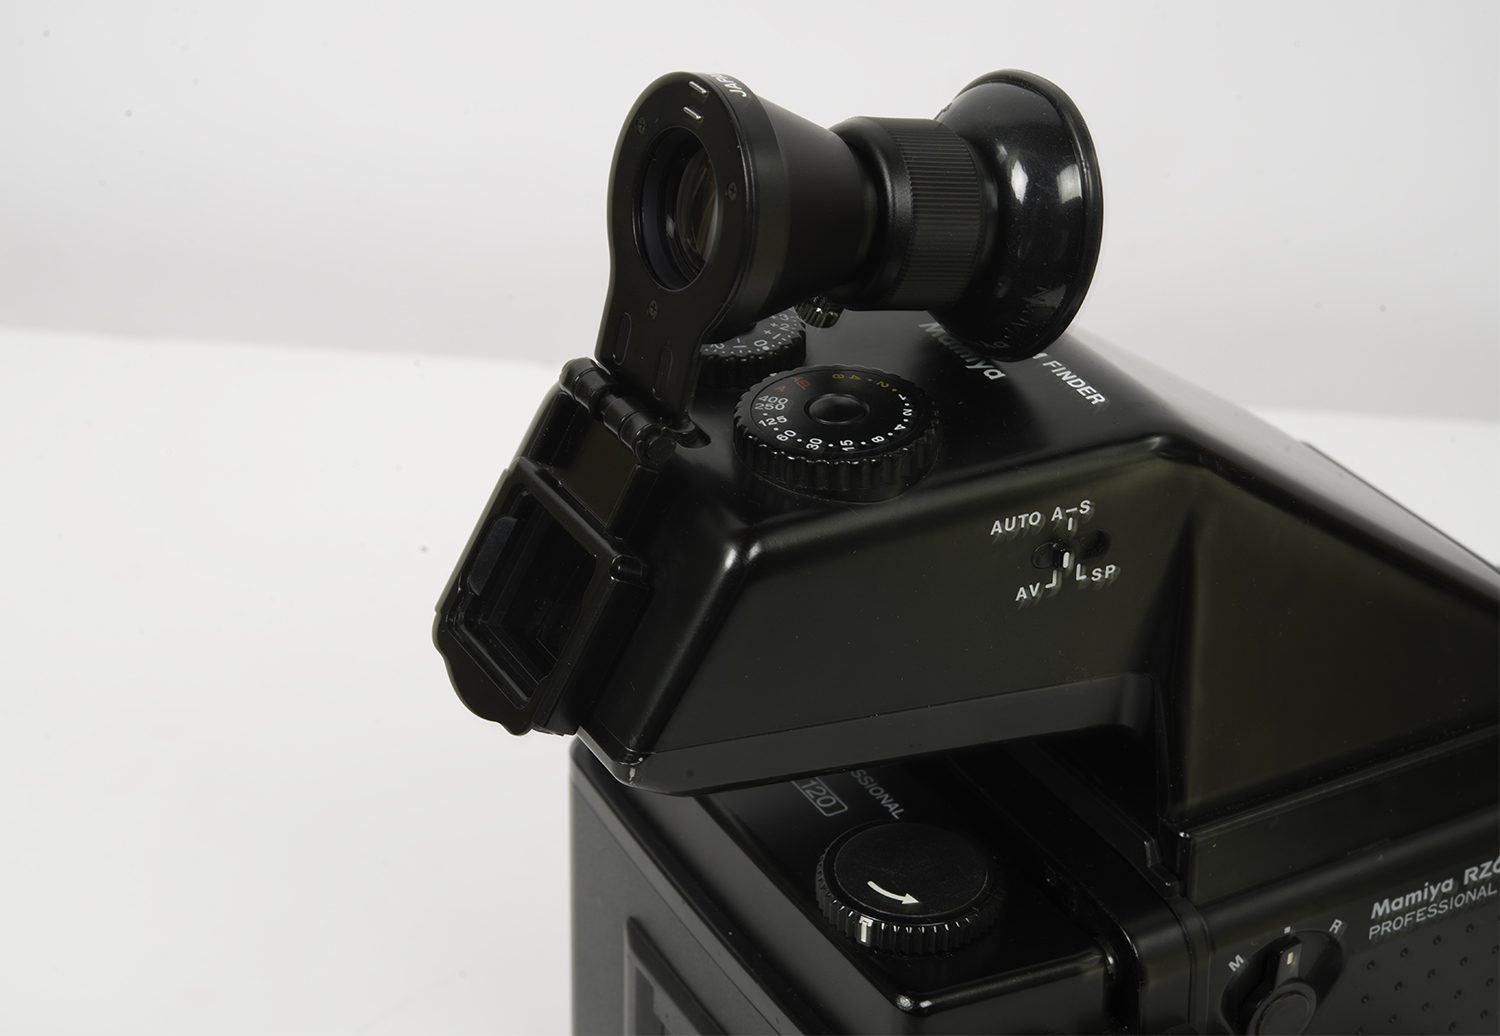 Mamiya RZ67 - magnifier FD701 for FE 701 and "Model 2" prisms (flipped up)